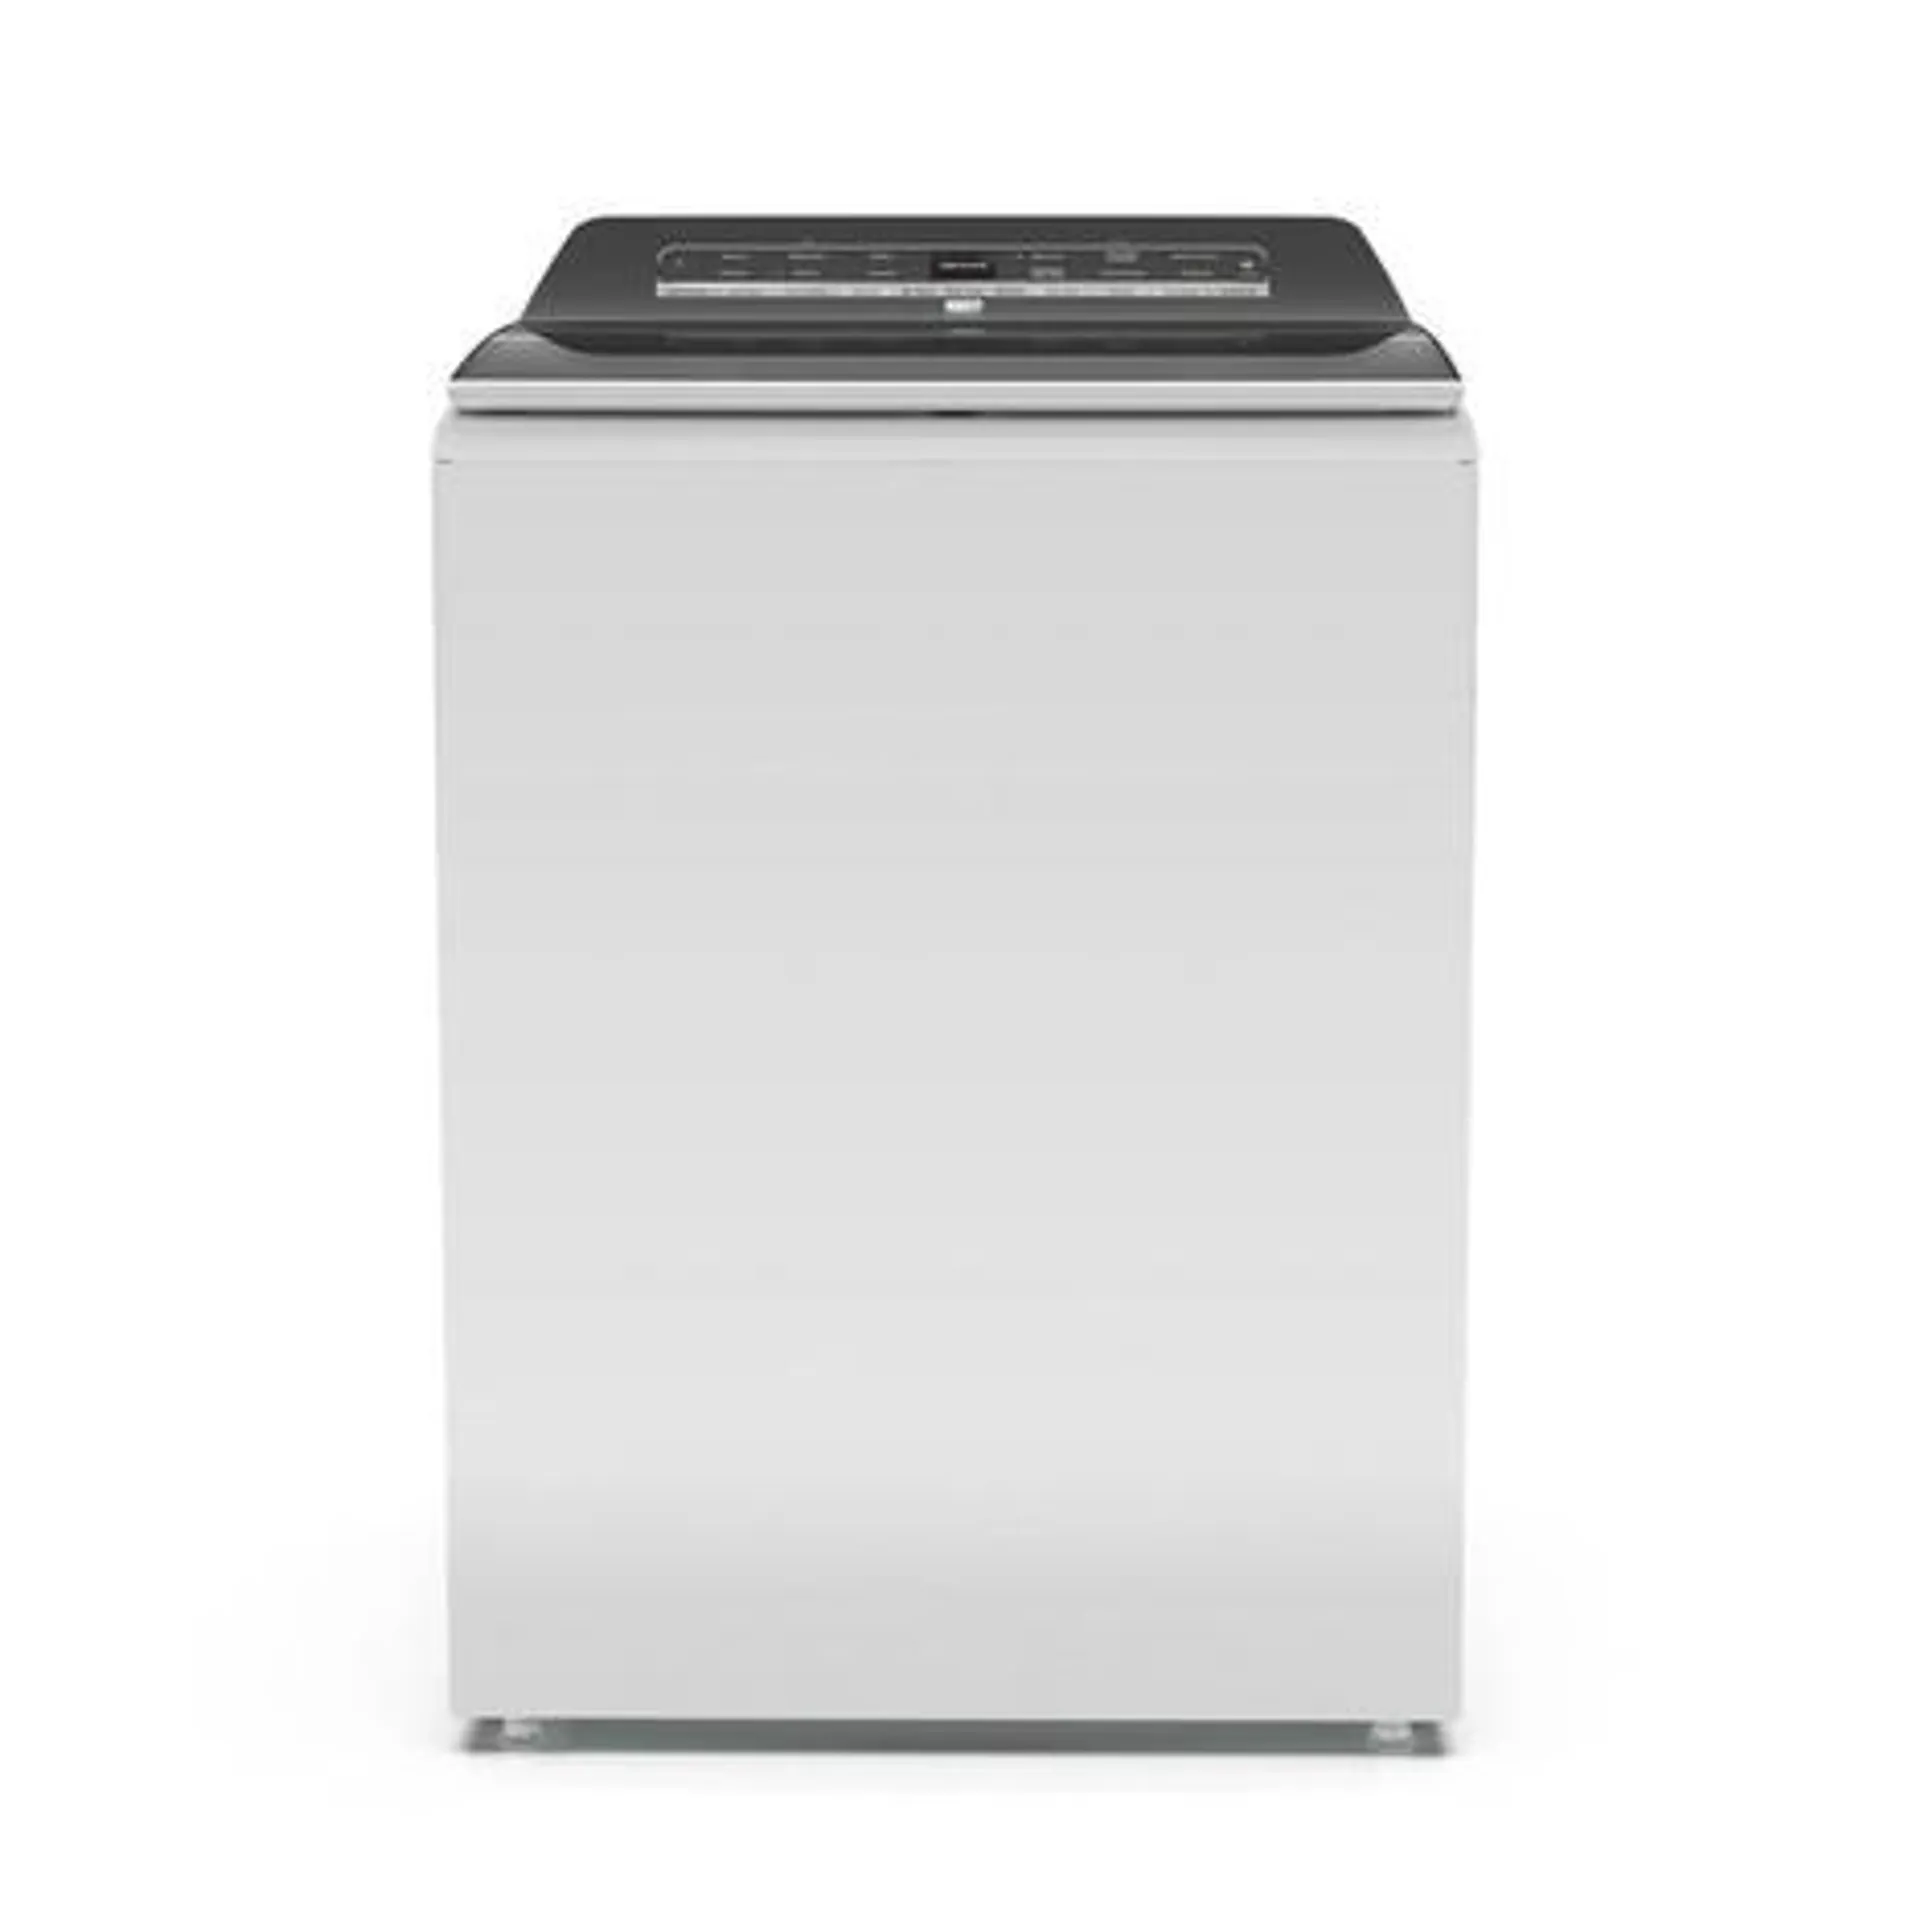 Kenmore 31312 4.8 cu. ft. Top Load Washer w/ Built-In Water Faucet & Impeller - White